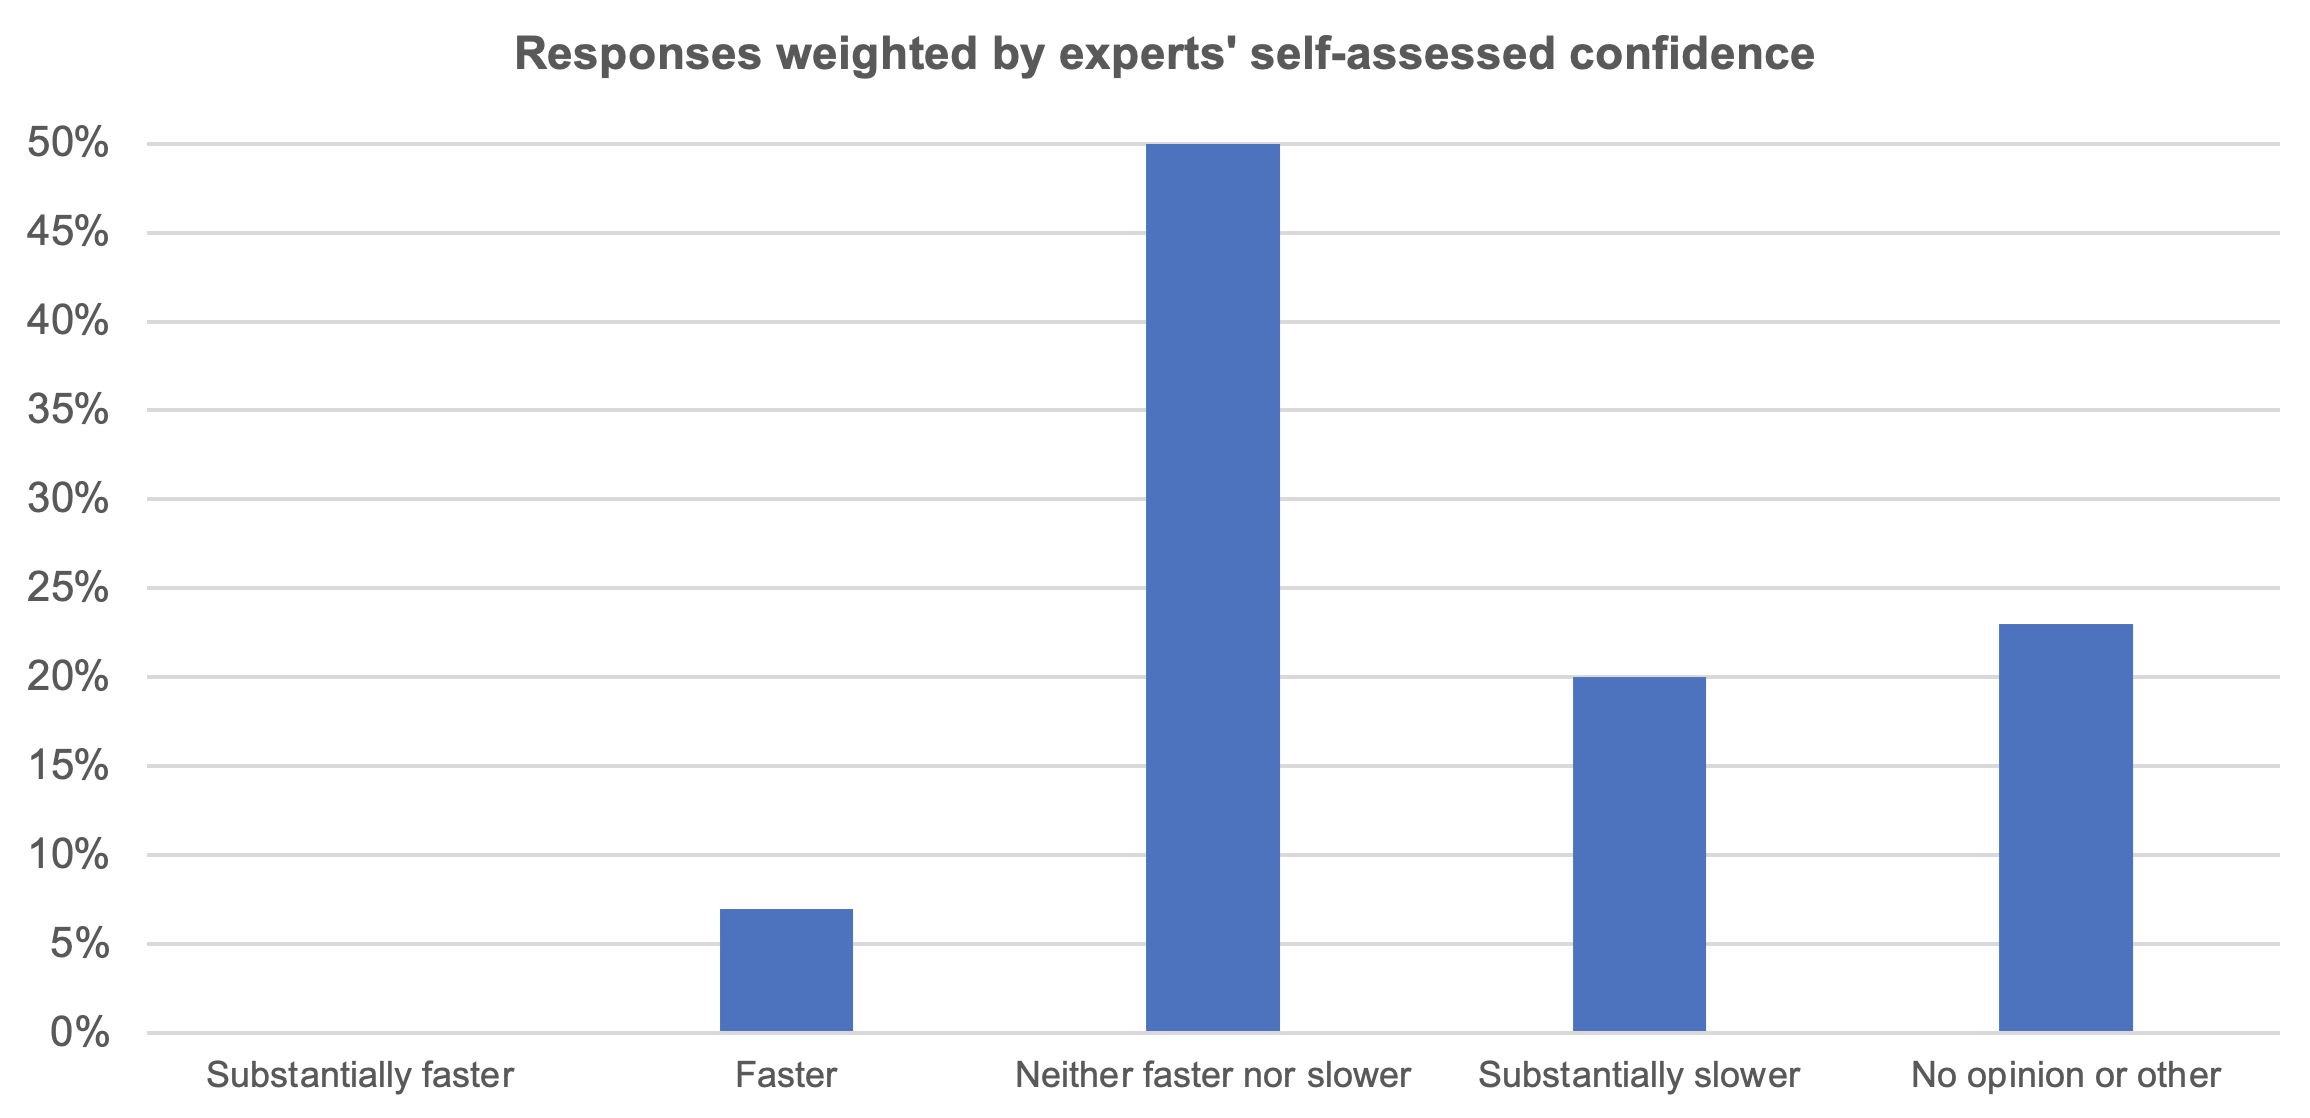 Question 2 responses weighted by experts' self-assessed confidence